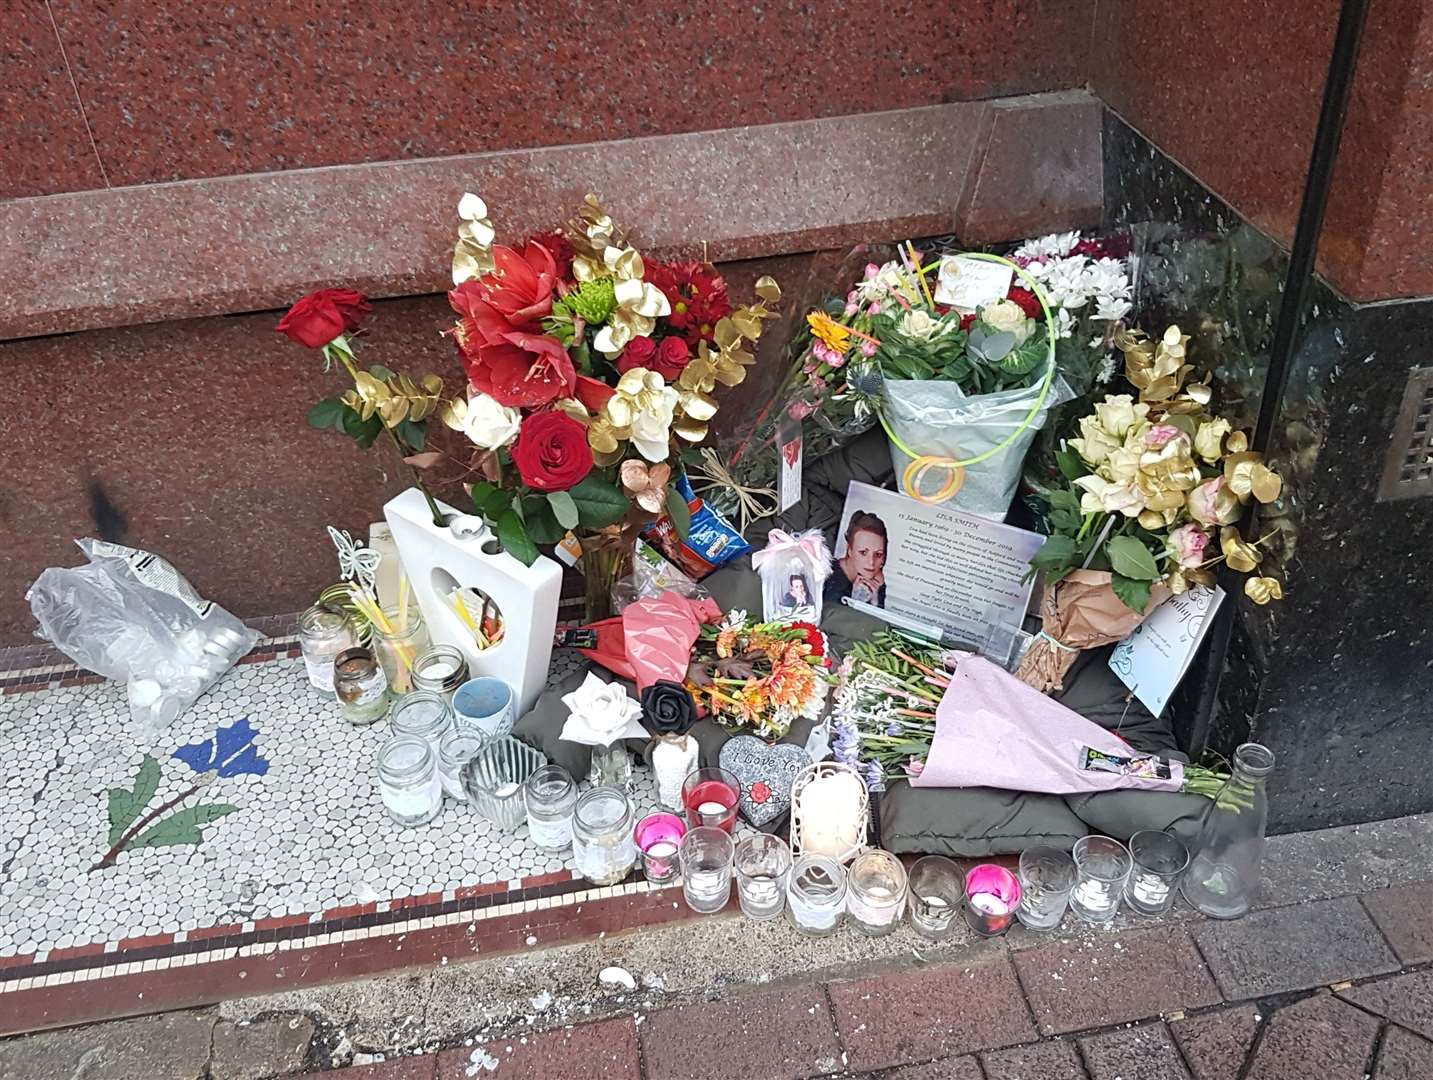 An eye-catching display of candles and flowers has been left outside NatWest